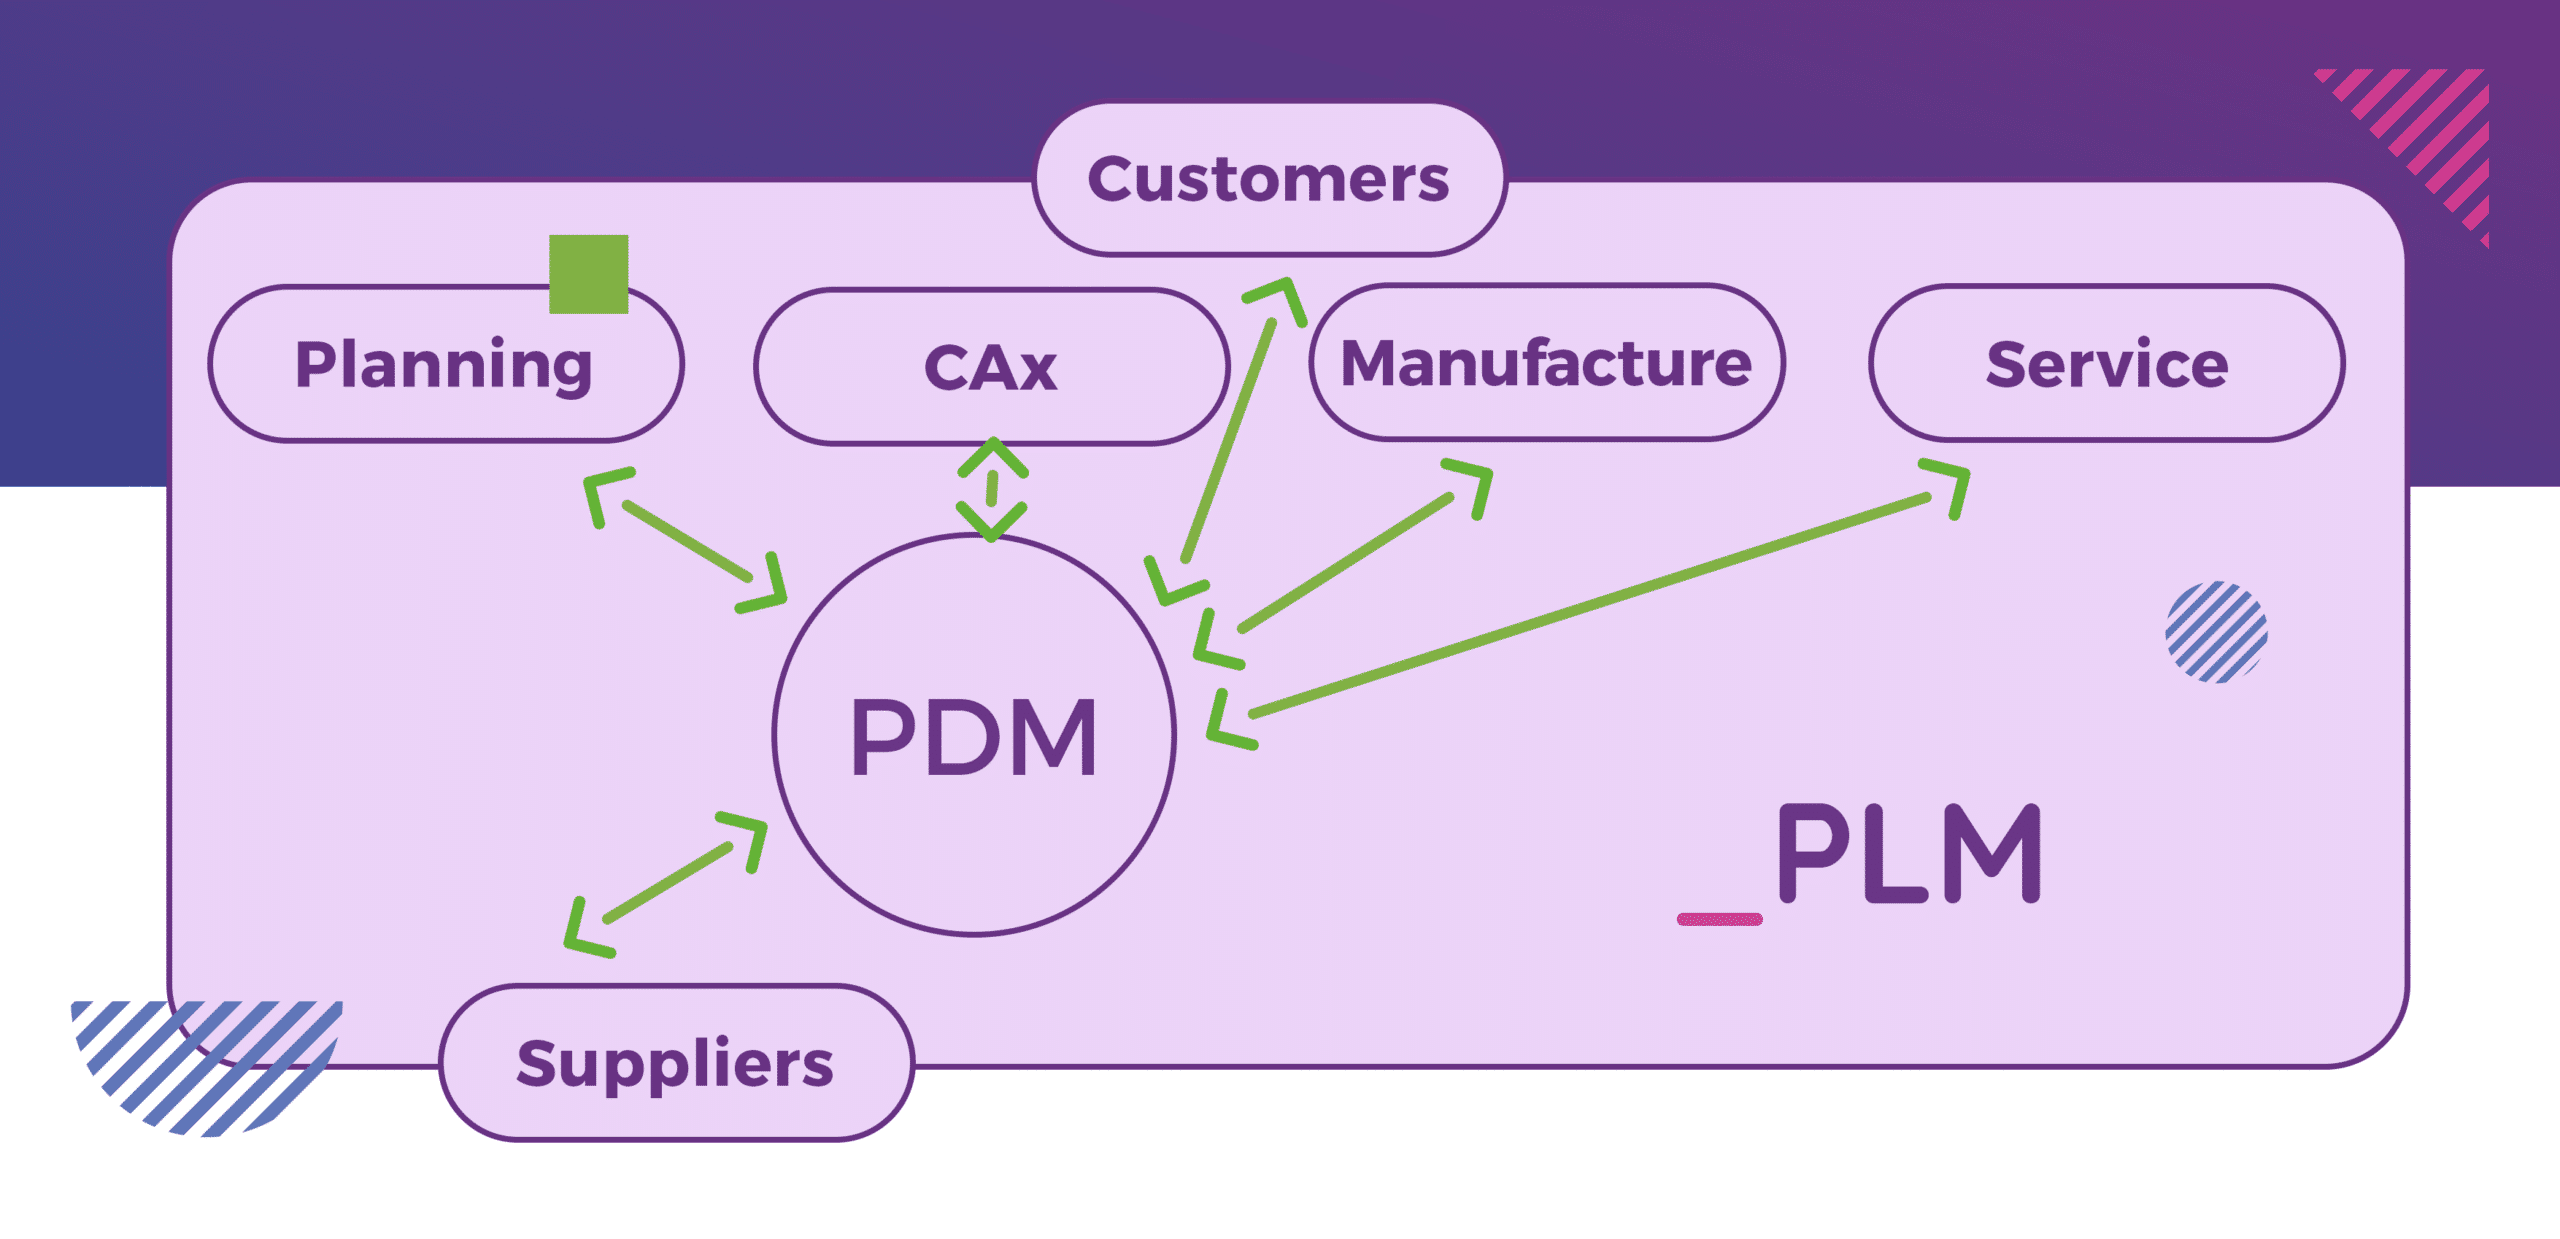 visual representation of engineering data in PLM and PDM environments